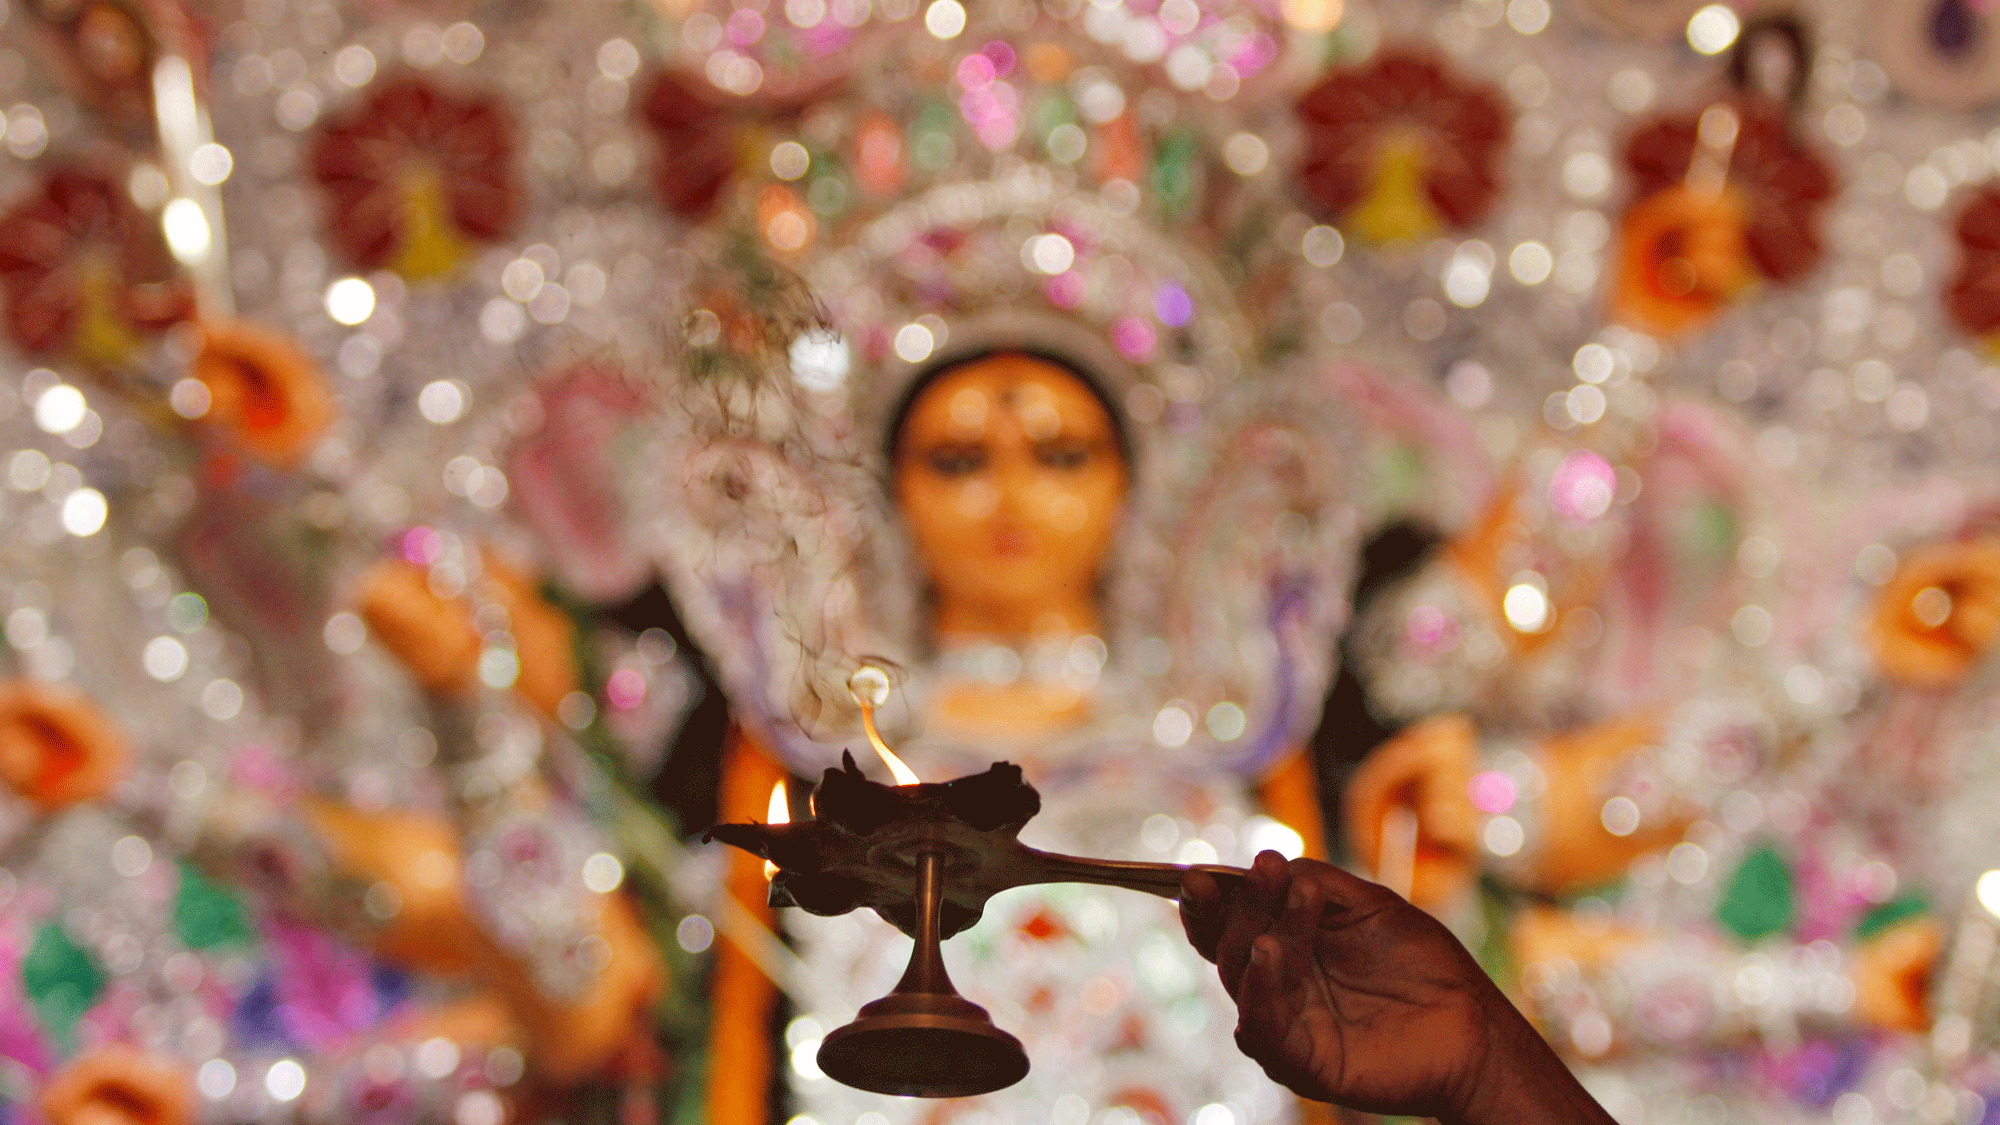 Durga Puja is the biggest festival celebrated in West Bengal.